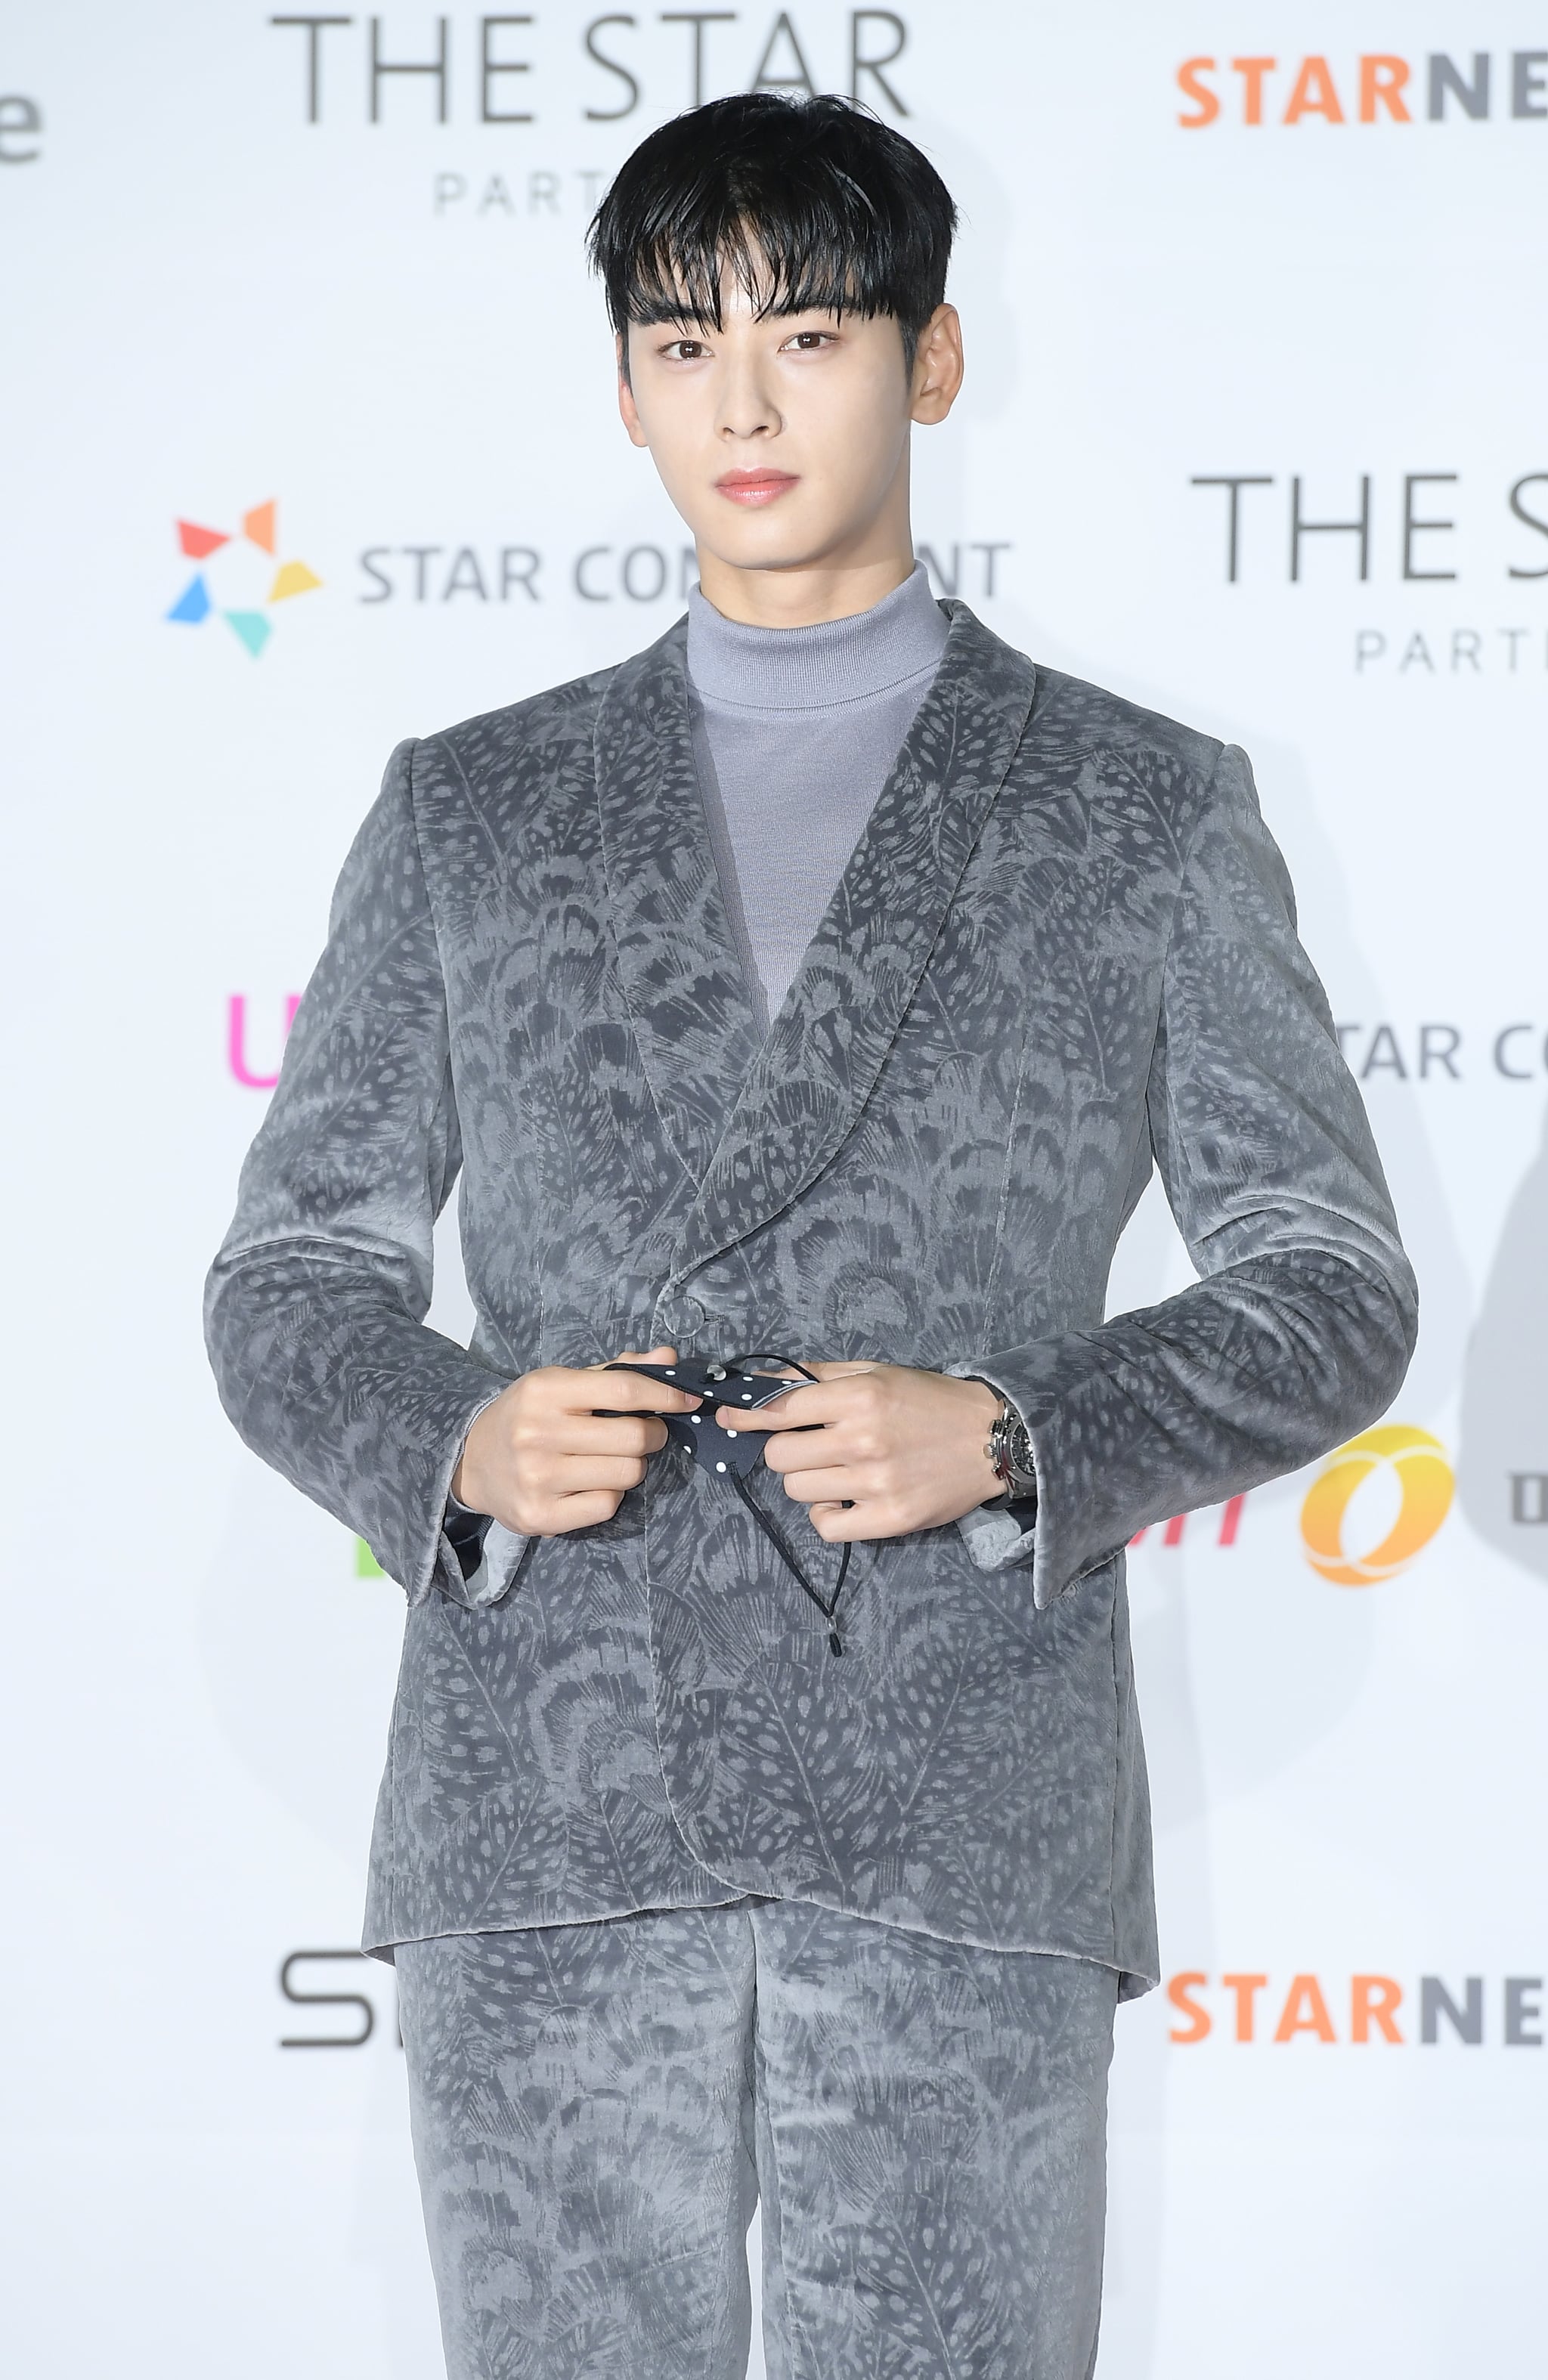 Today's K-pop] Astro's Cha Eunwoo may star in Hollywood film: report